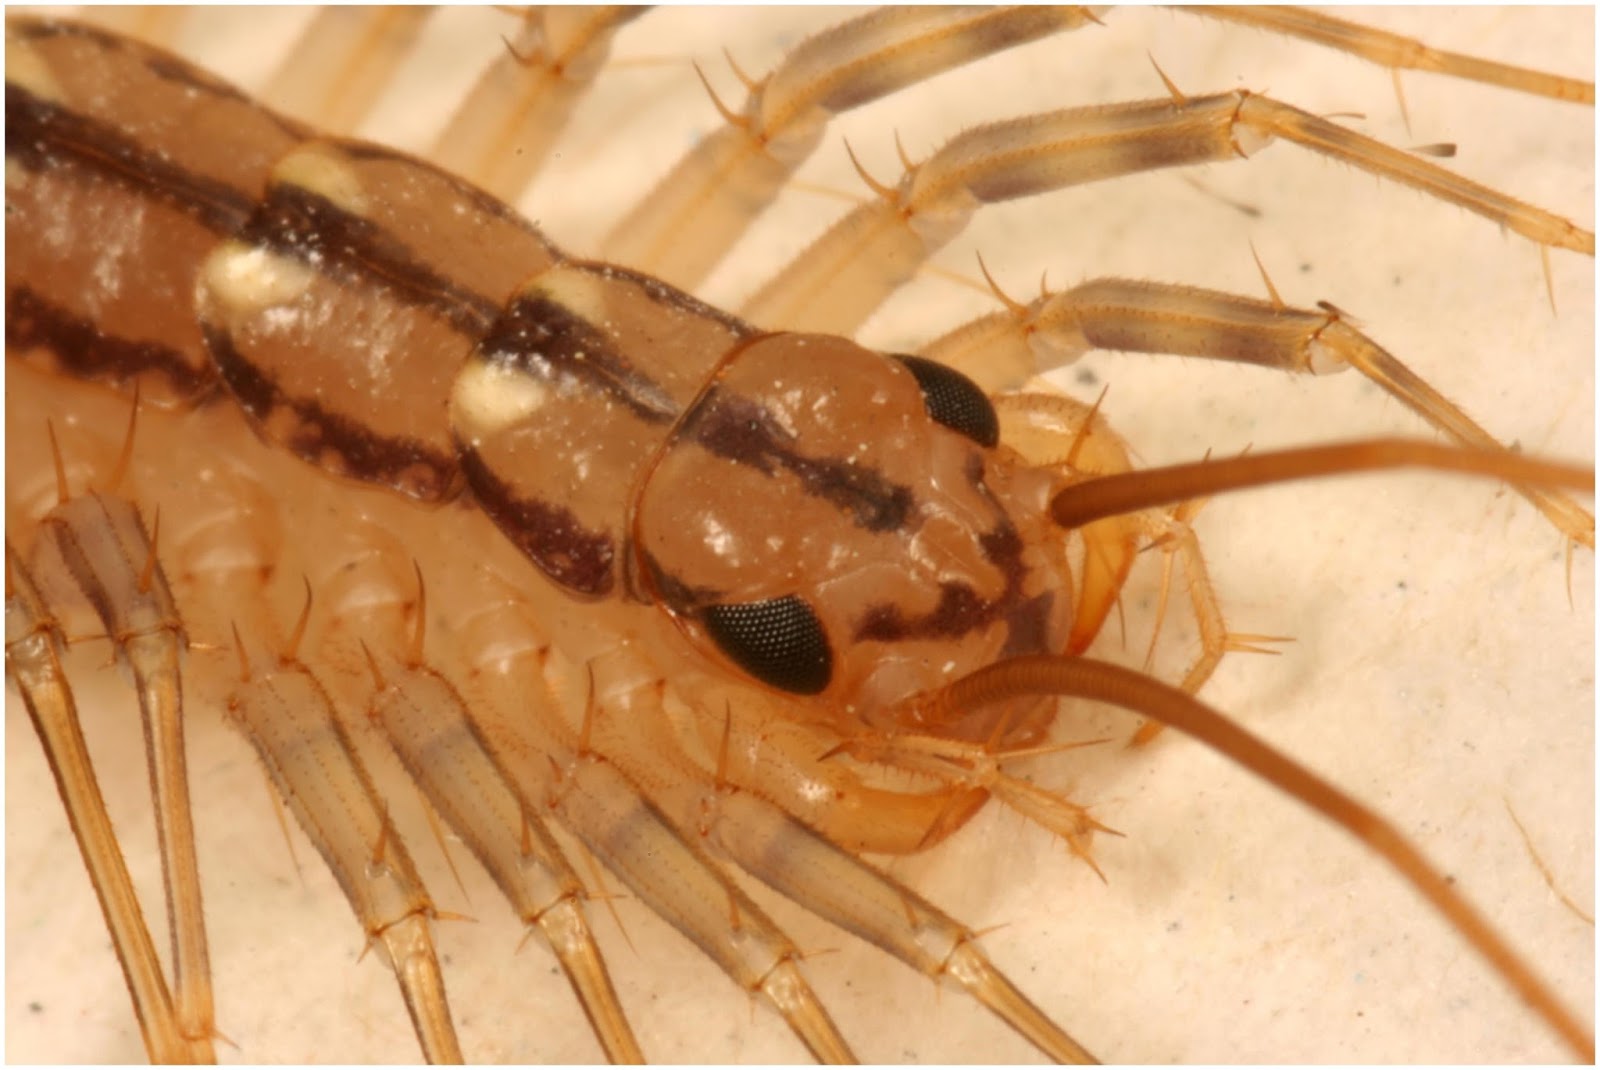 17 Small Crawling Bugs In Kitchen HOUSE CENTIPEDES ON THE MOVE What's Bugging You? Small,Crawling,Bugs,In,Kitchen